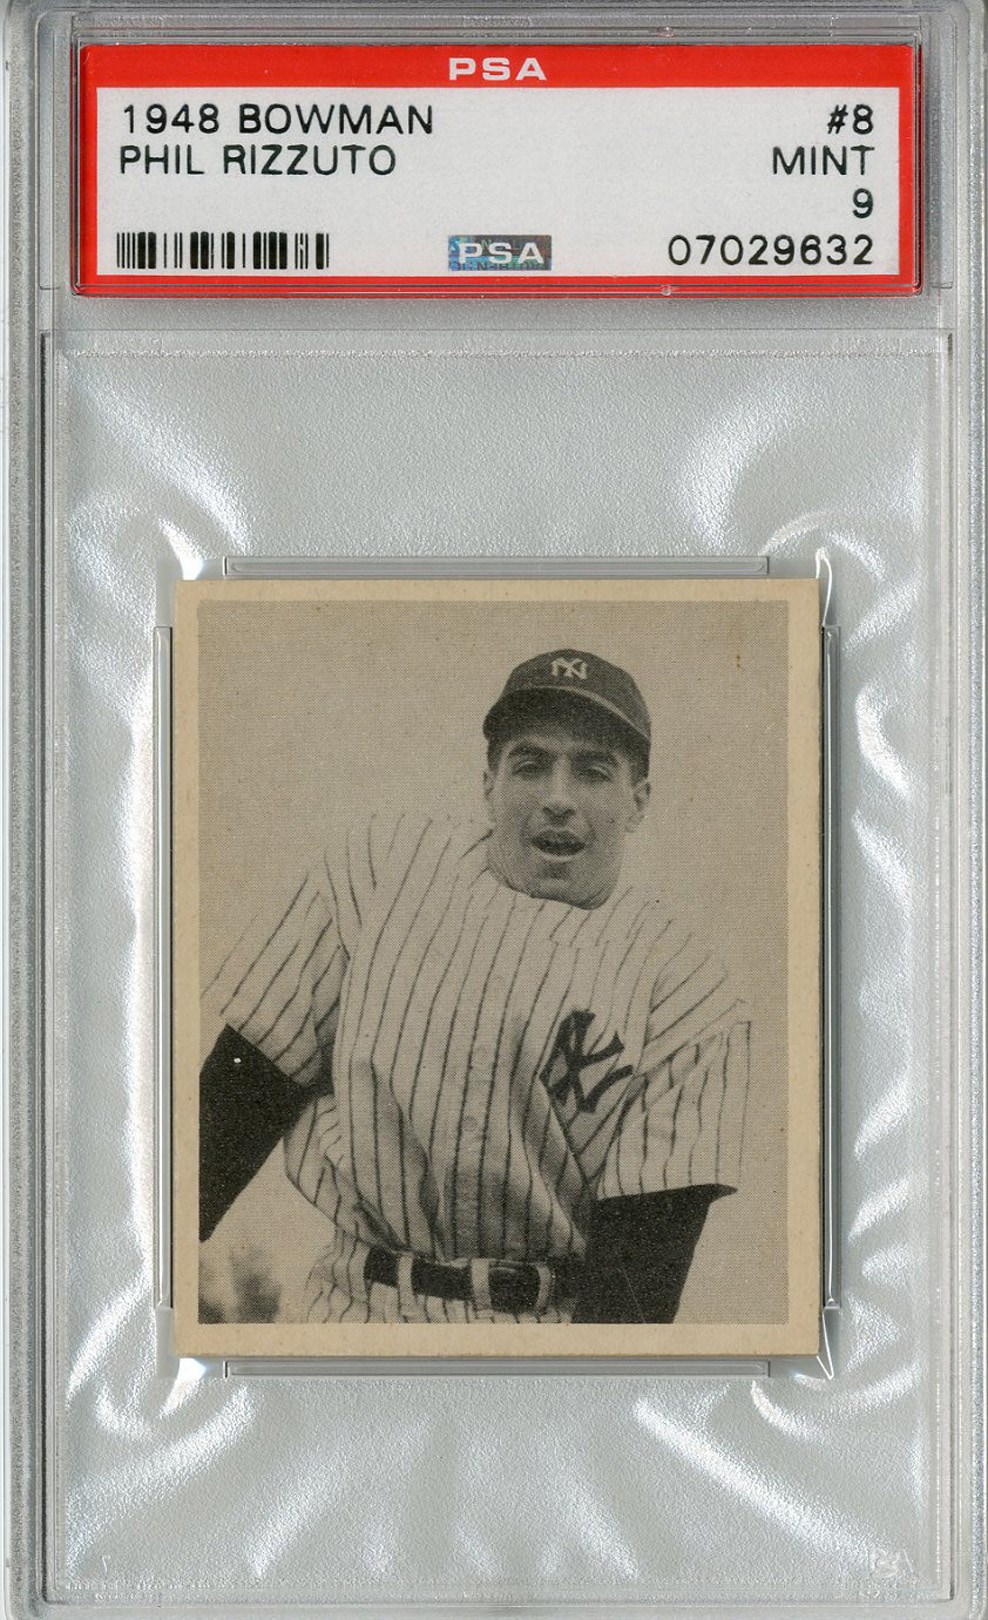 Baseball and Trading Cards - 1948 Bowman #8 Phil Rizzuto Rookie - PSA MINT 9